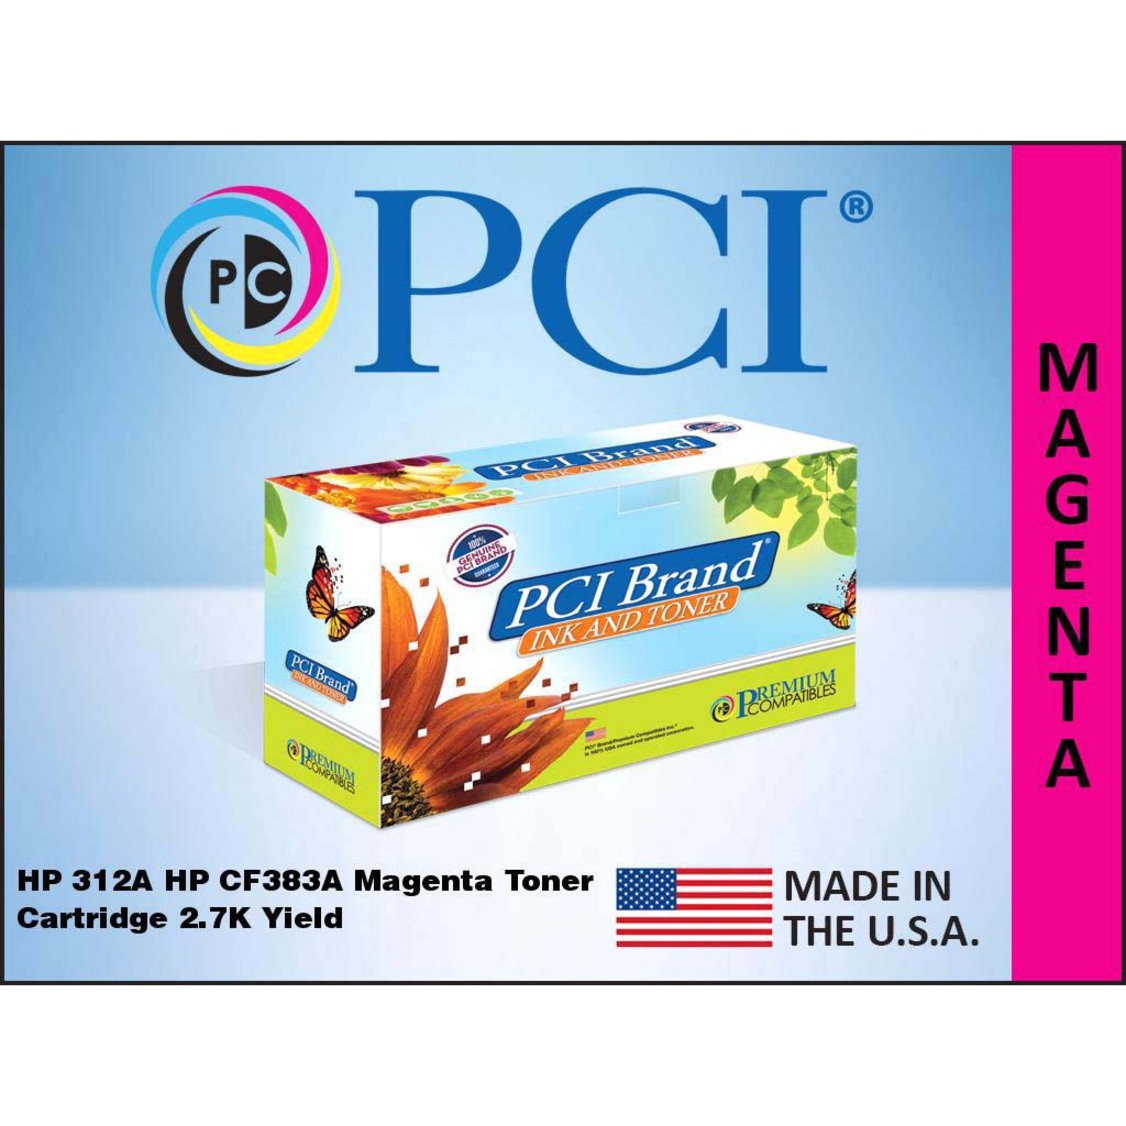 Premium Compatibles CF383A-PCI HP 312A Magenta Toner Cartridge 2.7K Yield, Made in the USA